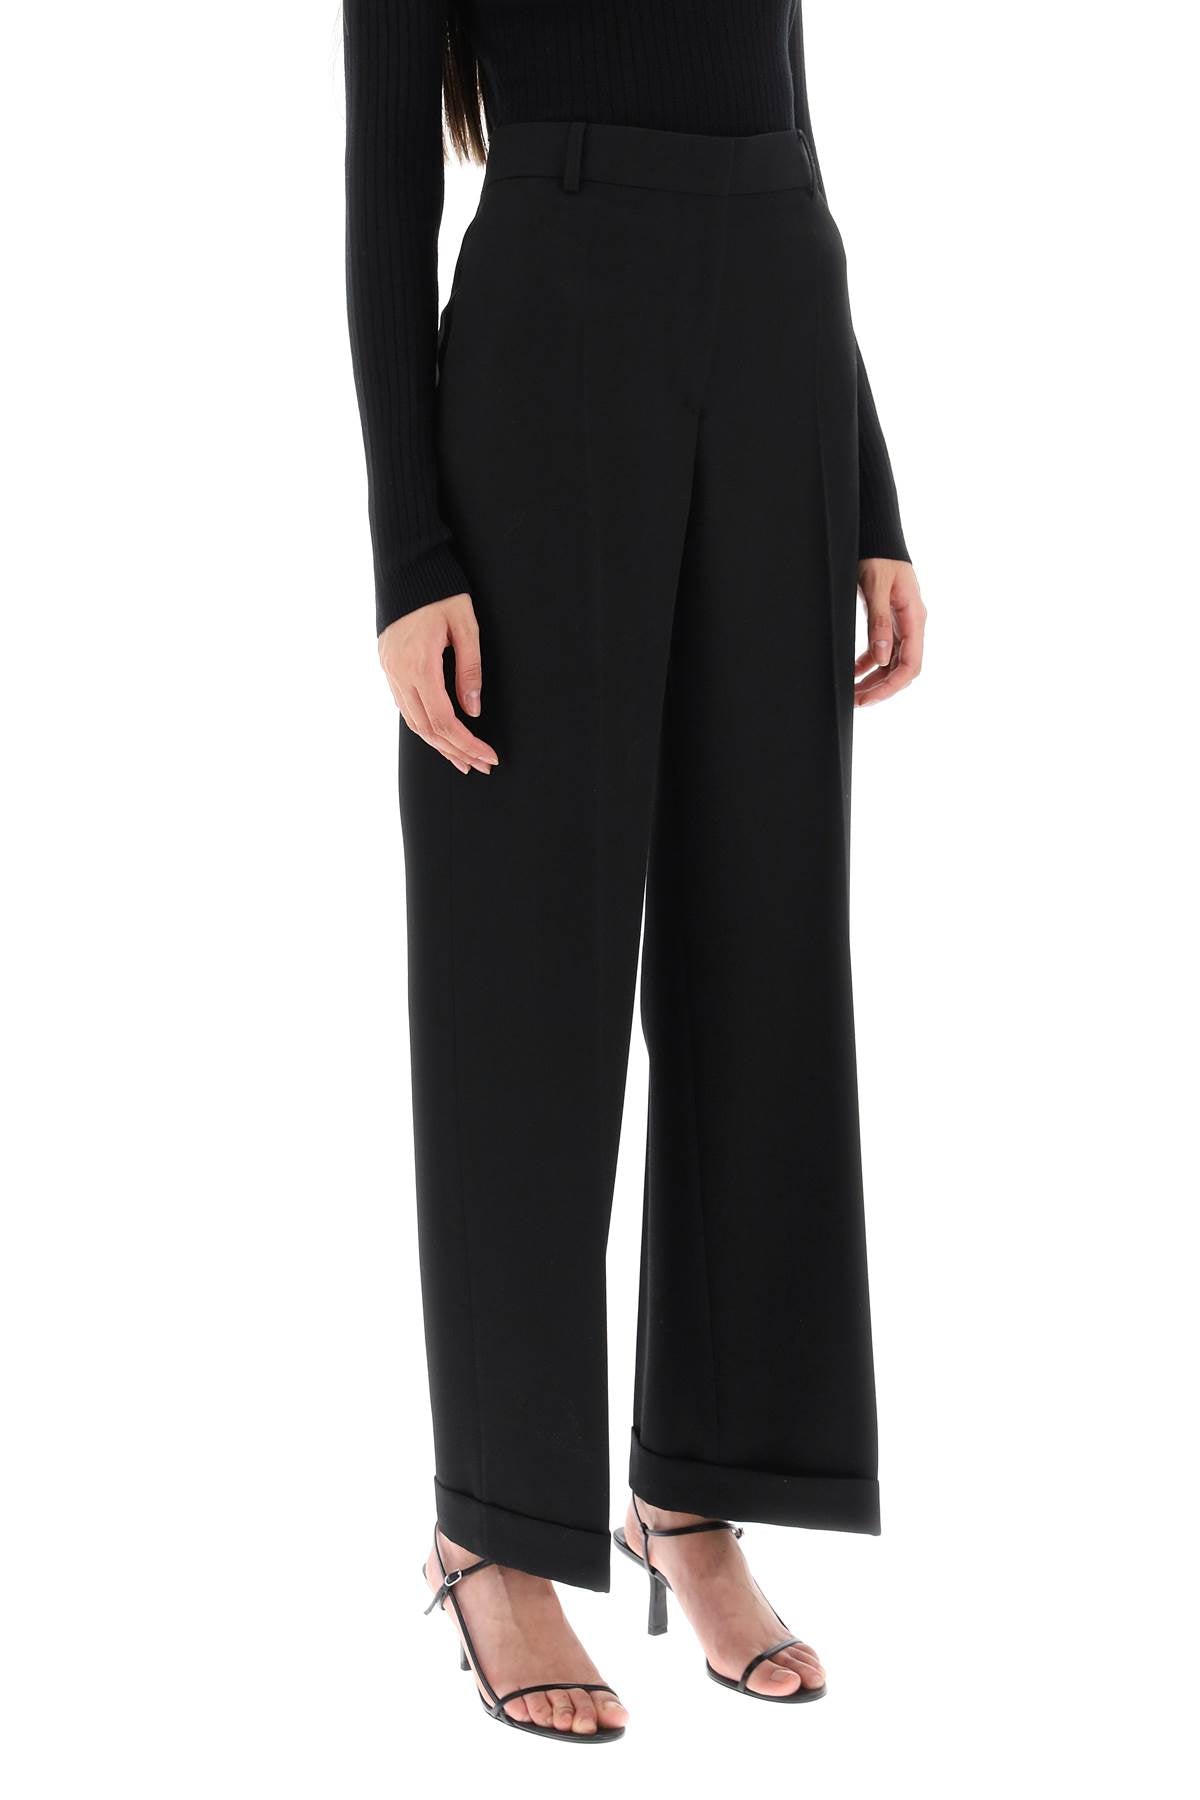 Toteme cuffed straight trousers